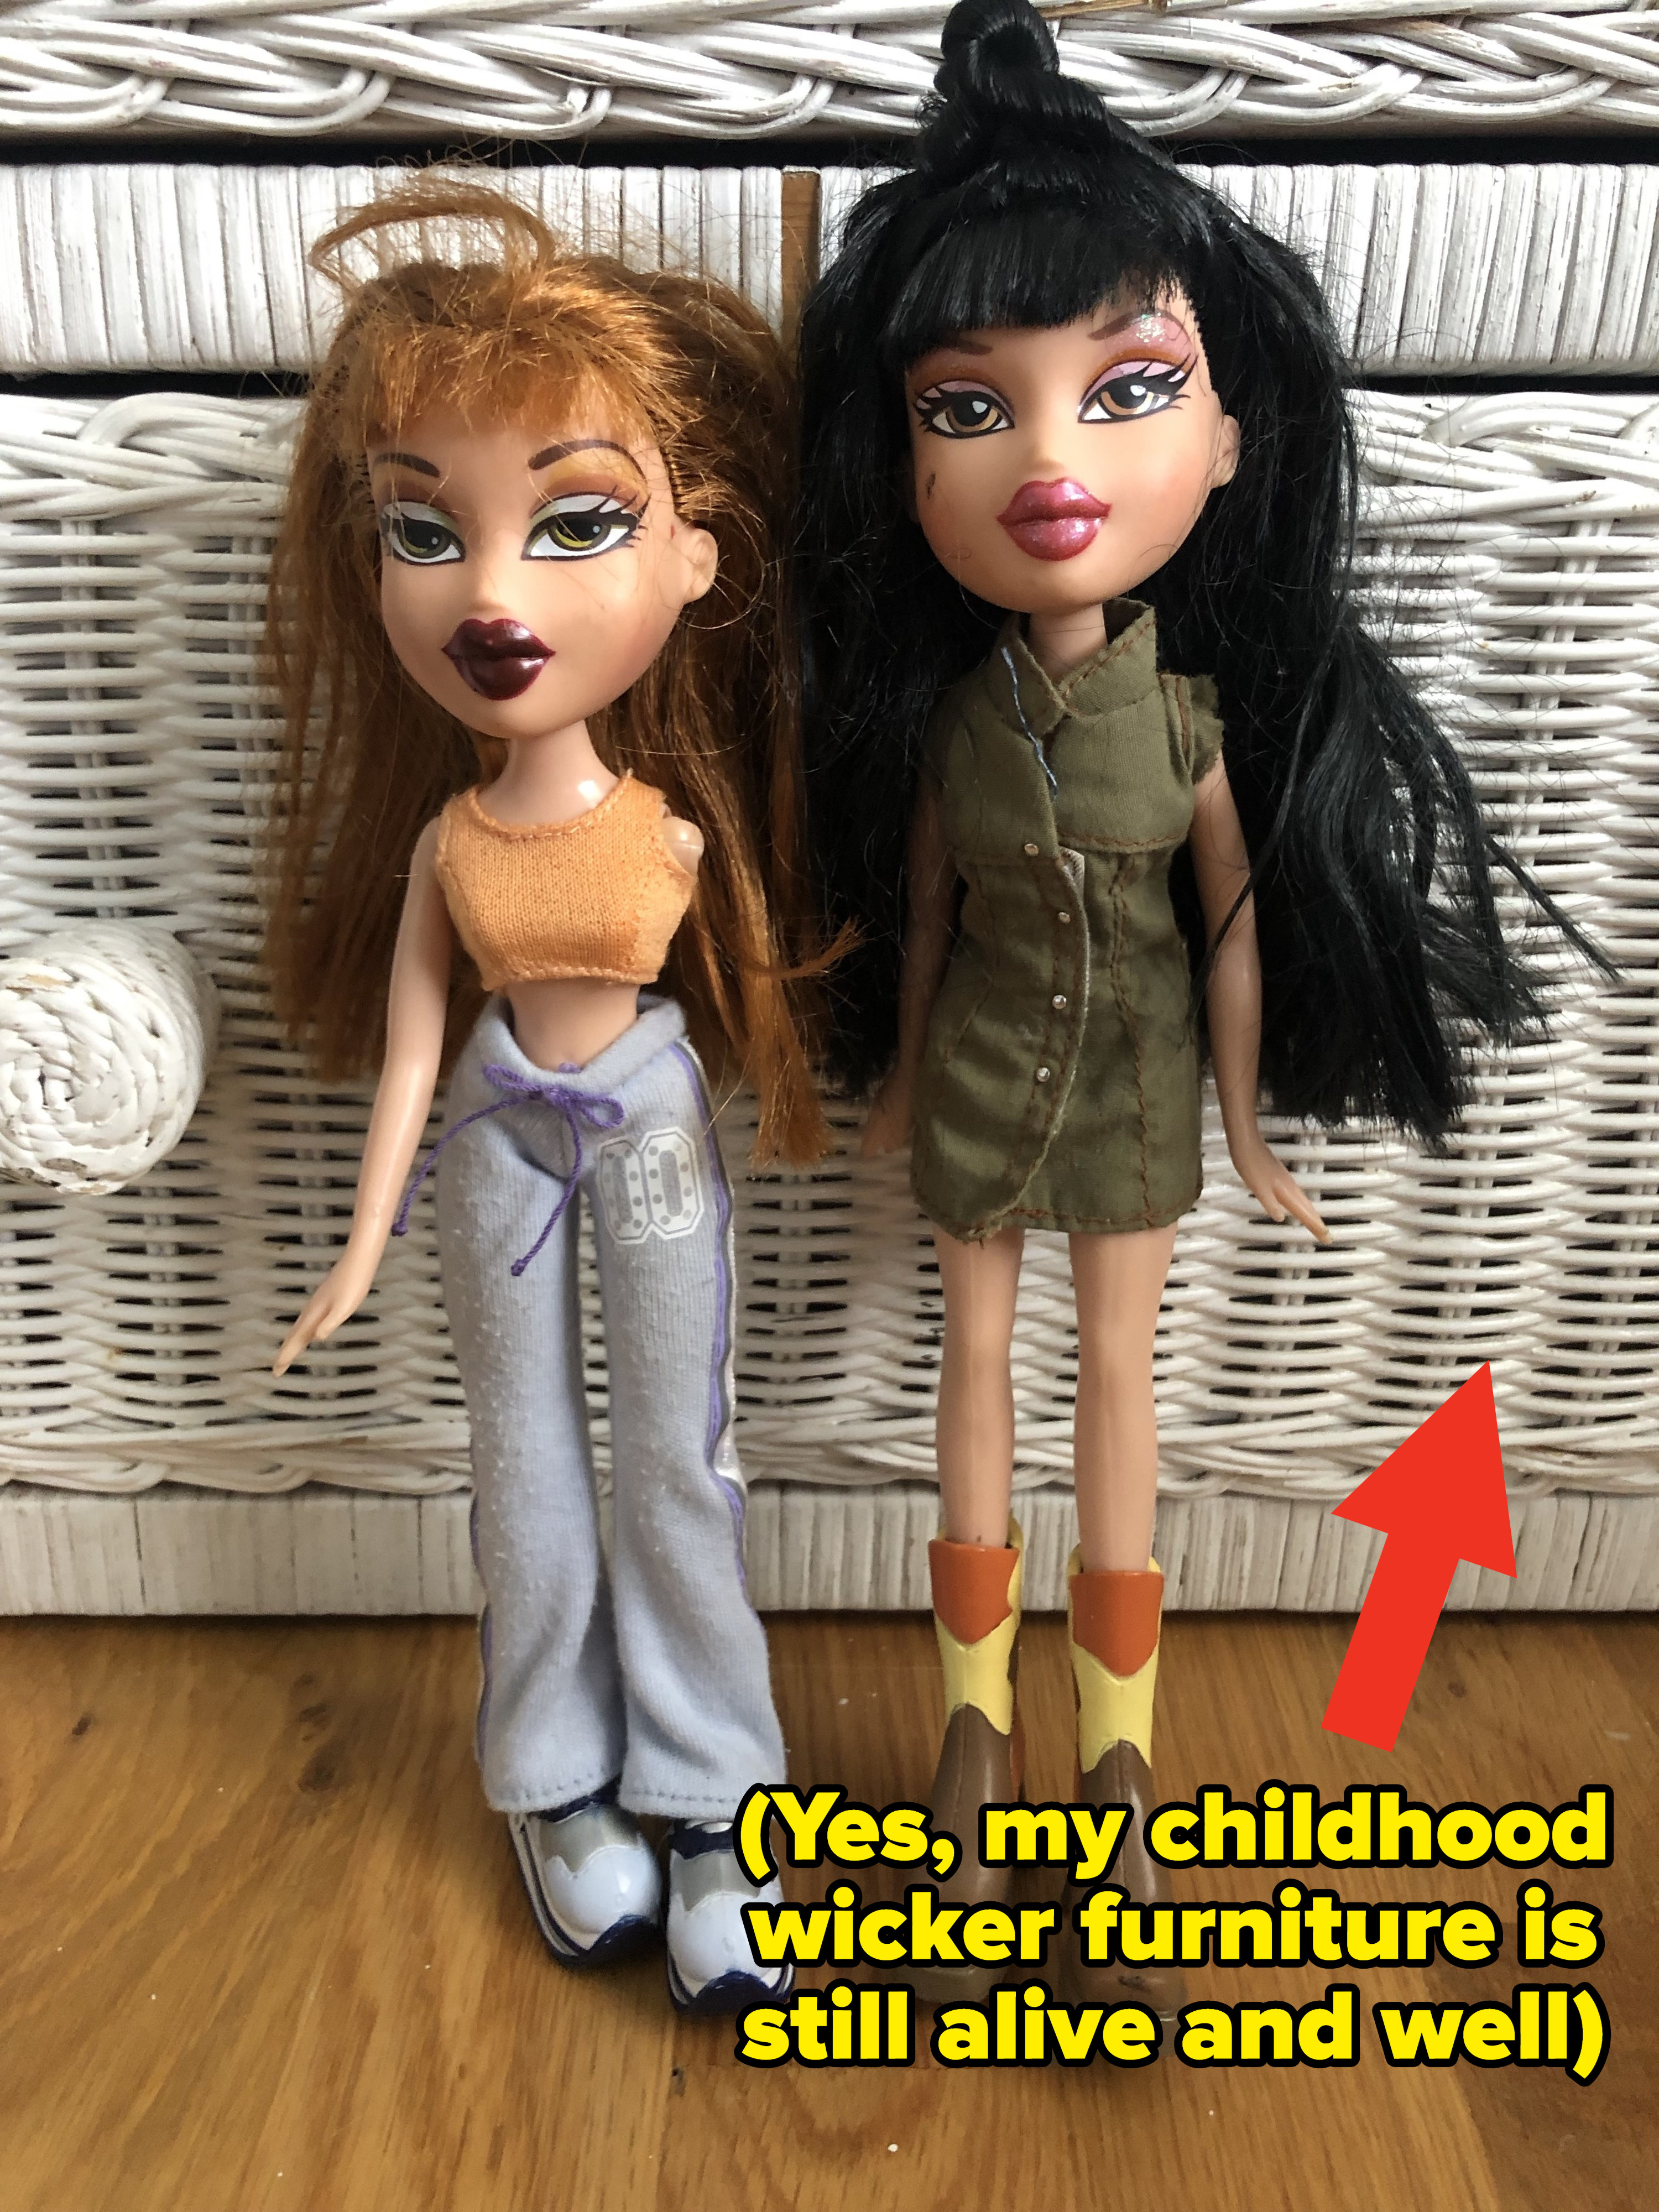 Bratz dolls placed in front of wicker furniture with text that reads: &quot;(Yes, my childhood wicked furniture is still alive and well)